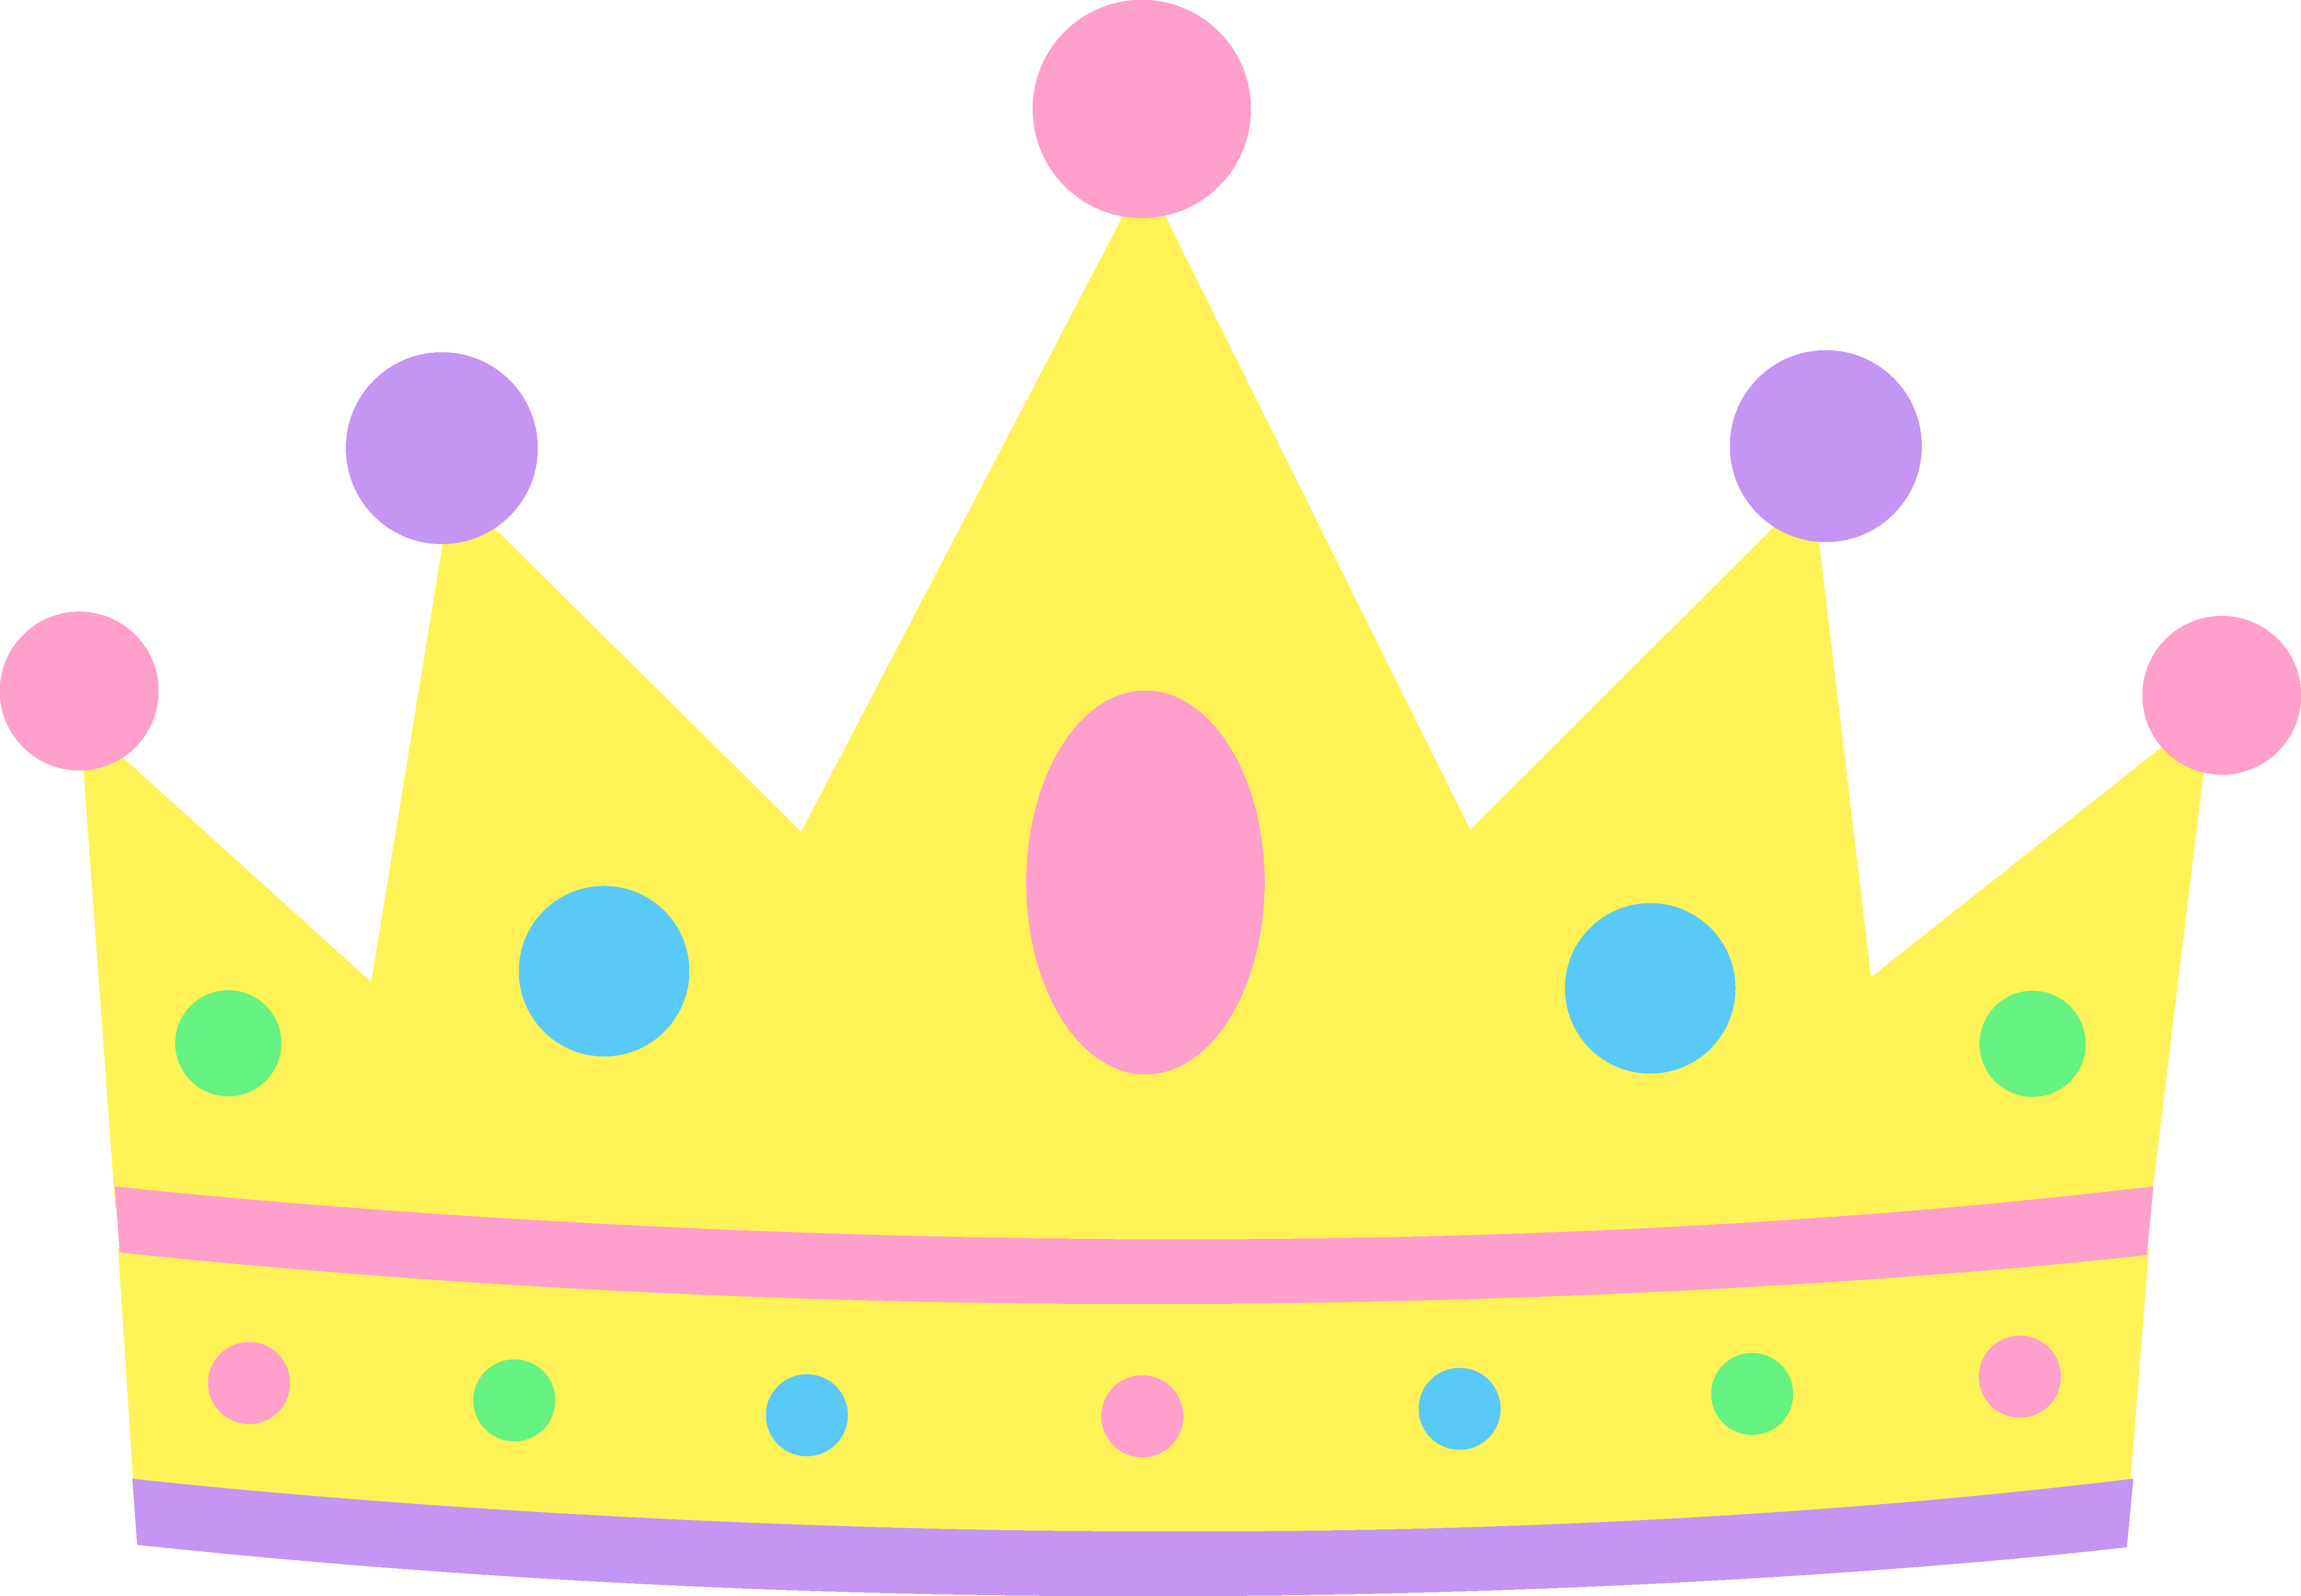 Clipart crown glittery. Princess at getdrawings com